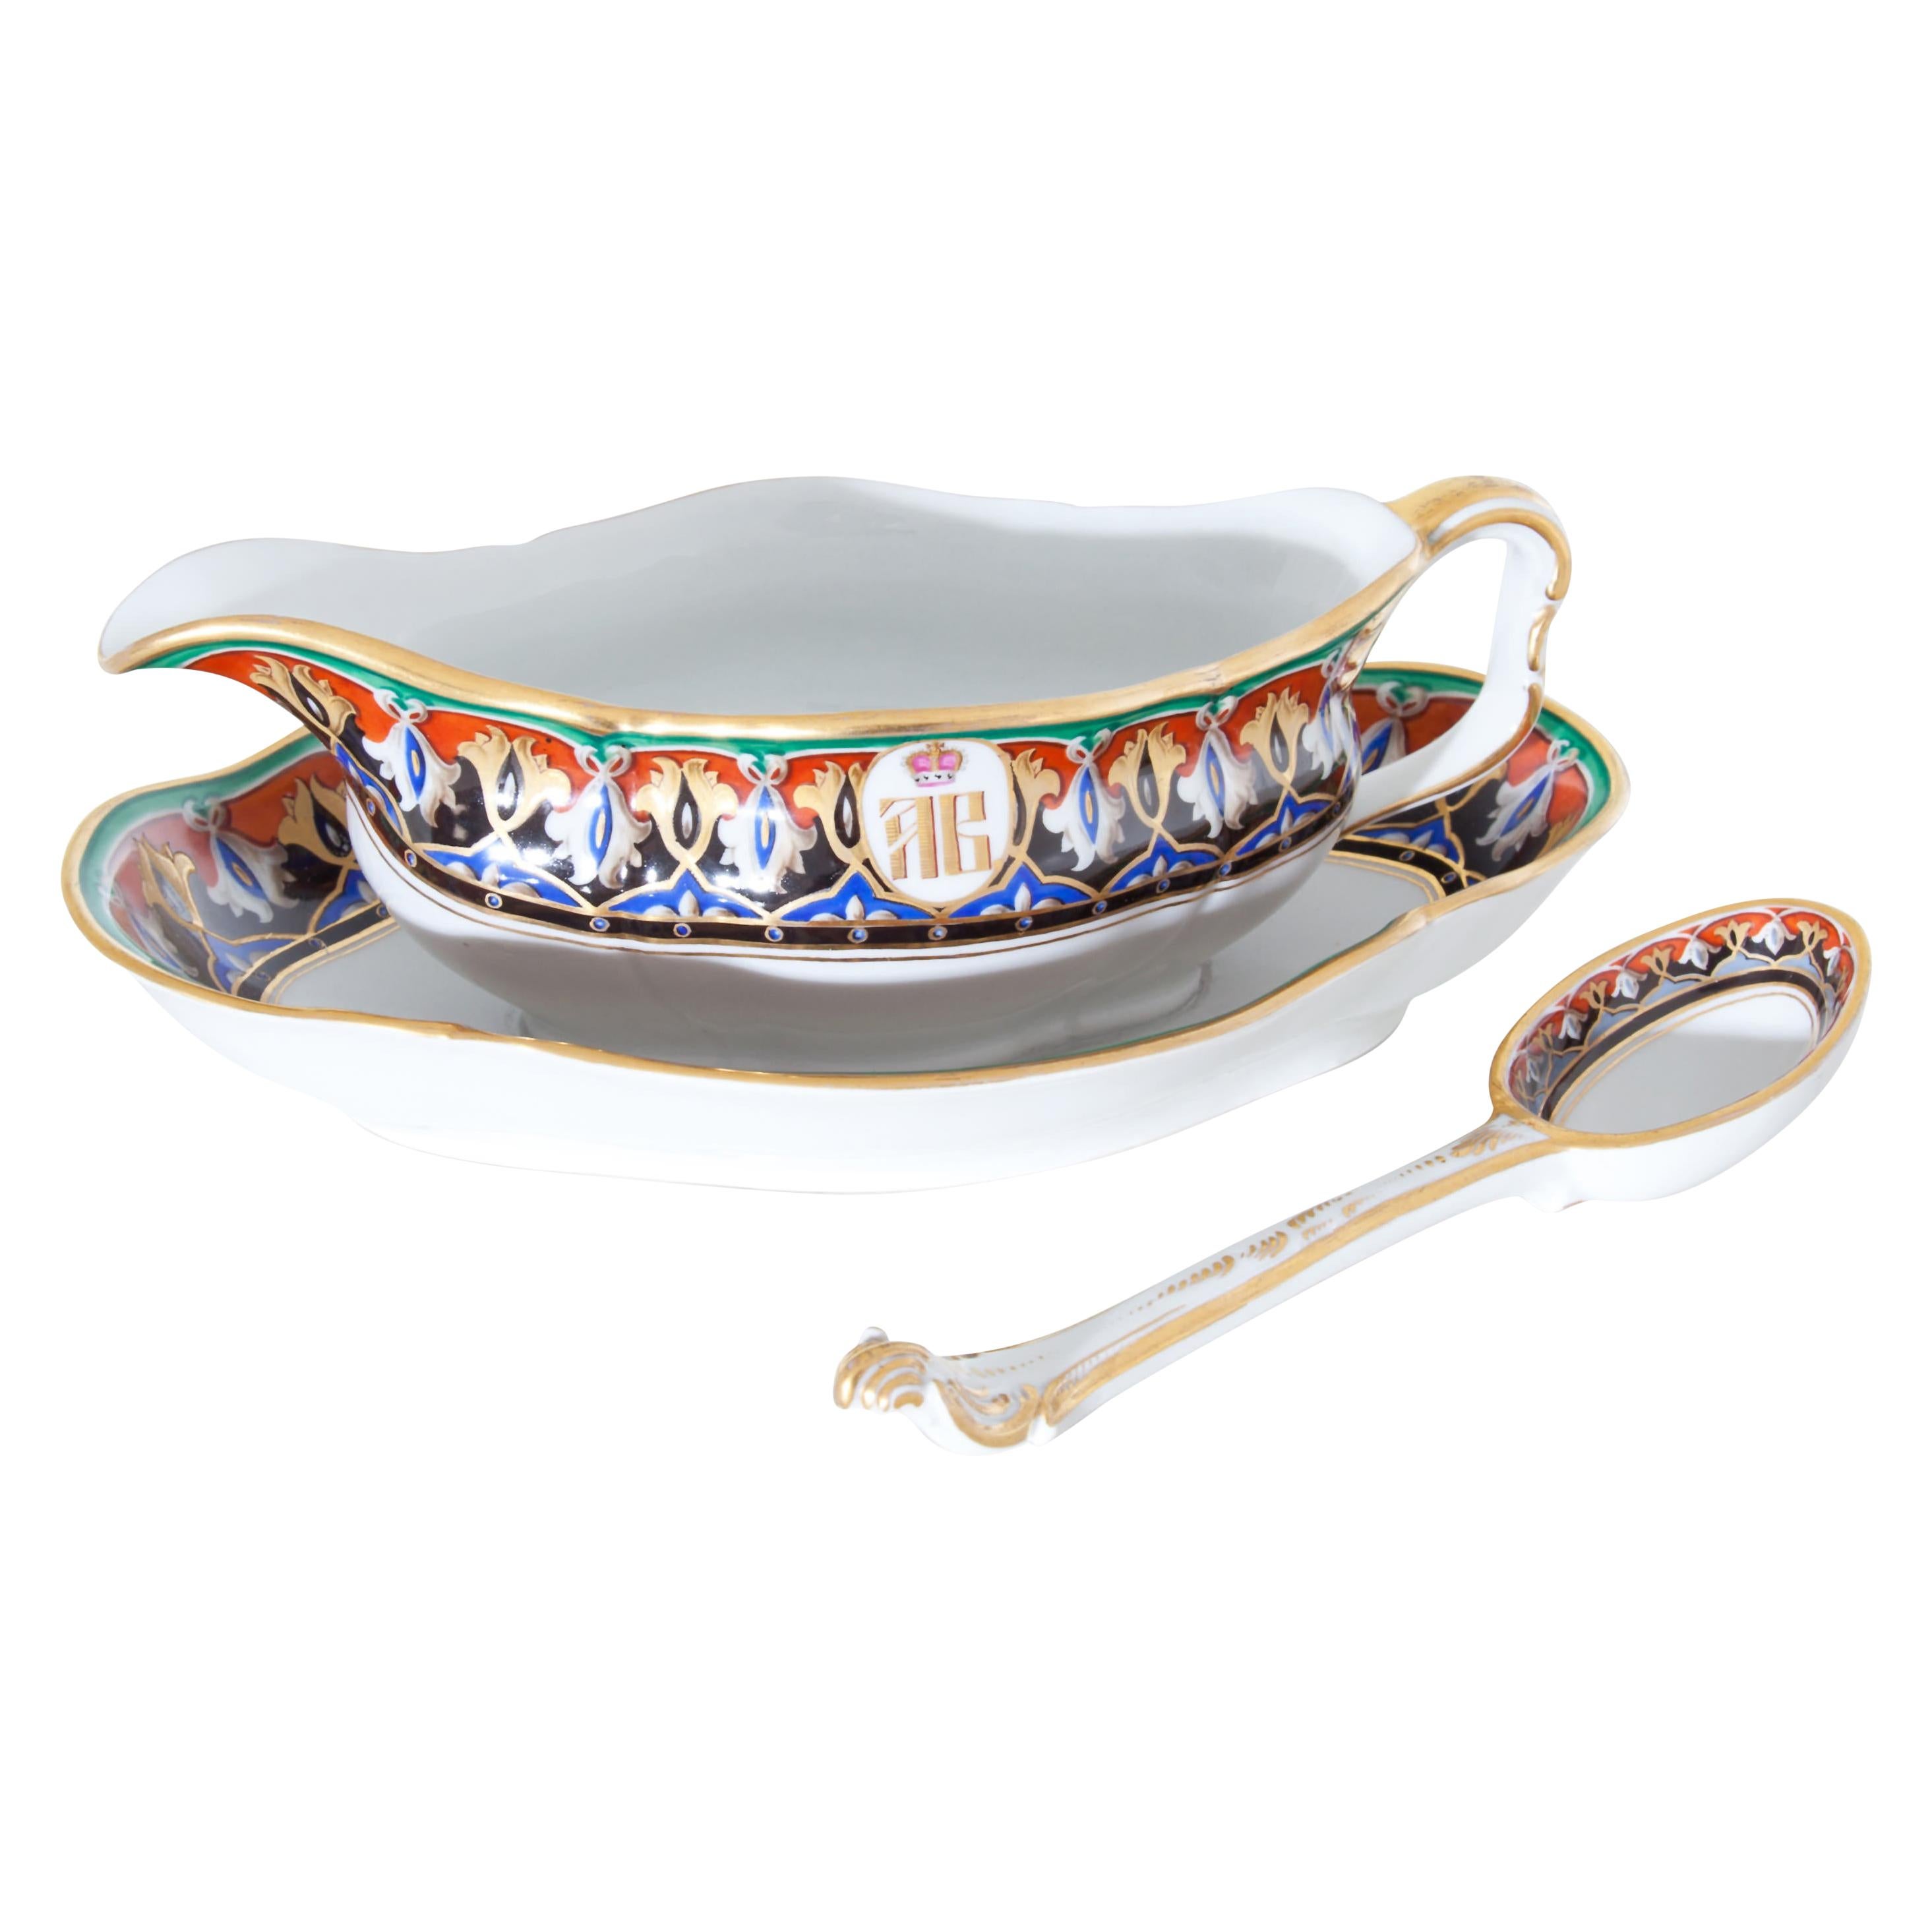 Porcelain Gravy Boat and Spoon with Monogram WA, KPM, Berlin, Germany, 1849-1870 For Sale